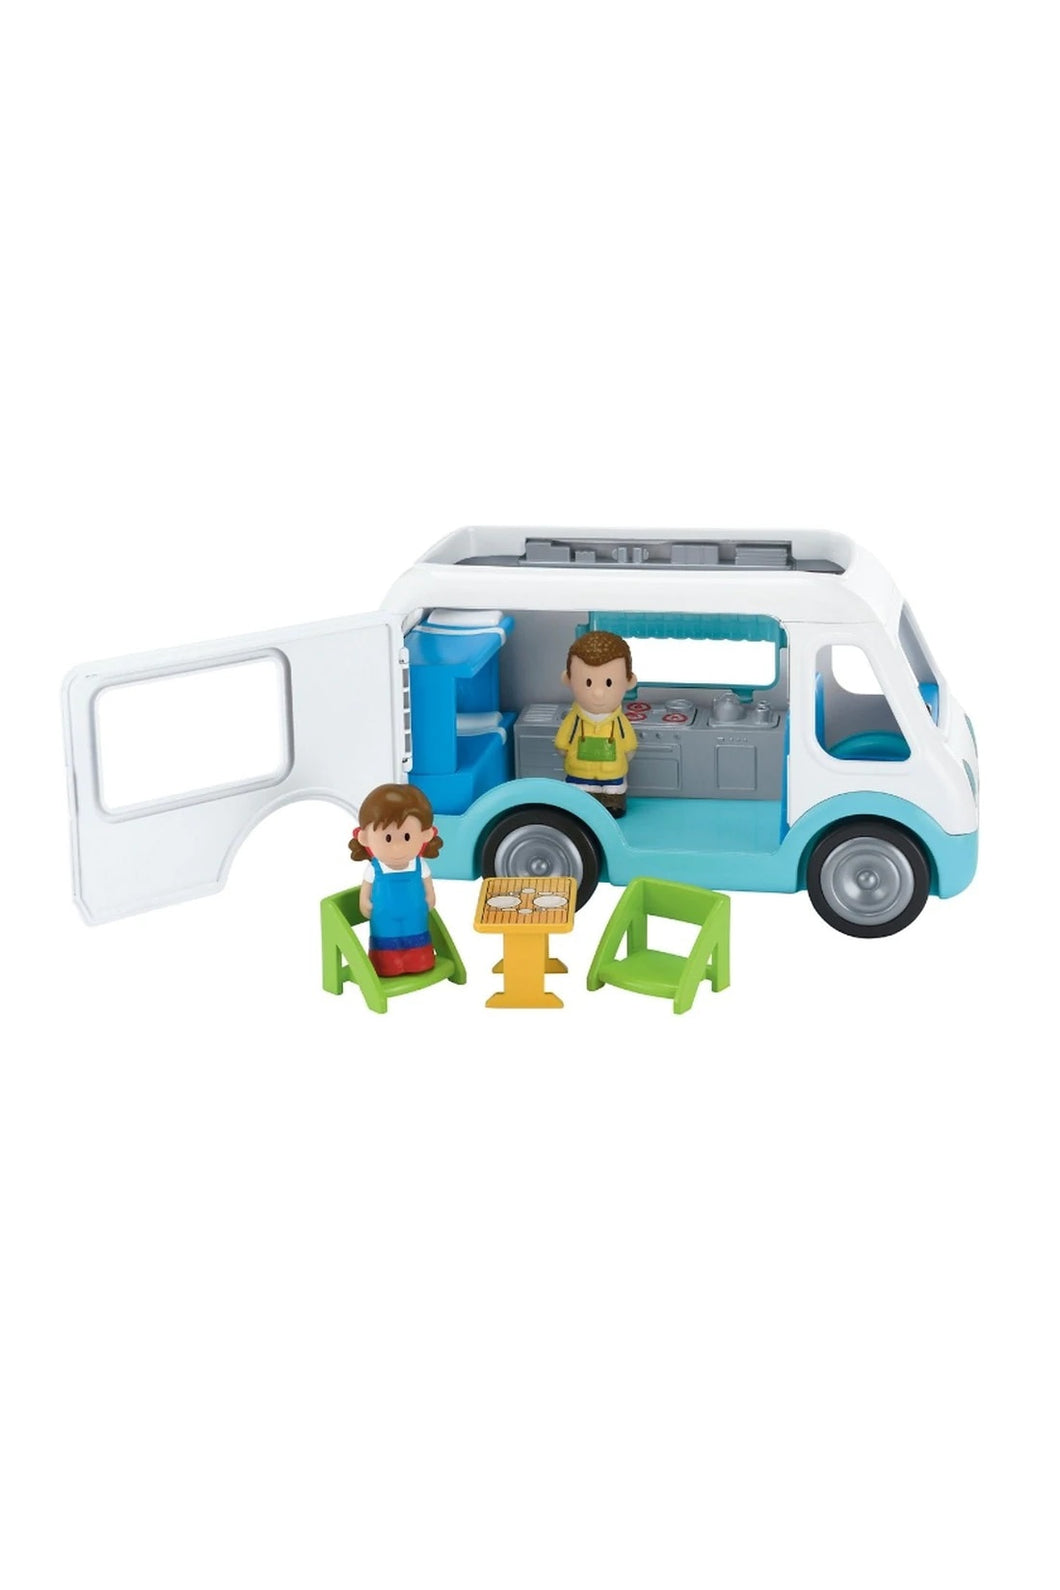 Early Learning Centre Happyland Camping Van 1